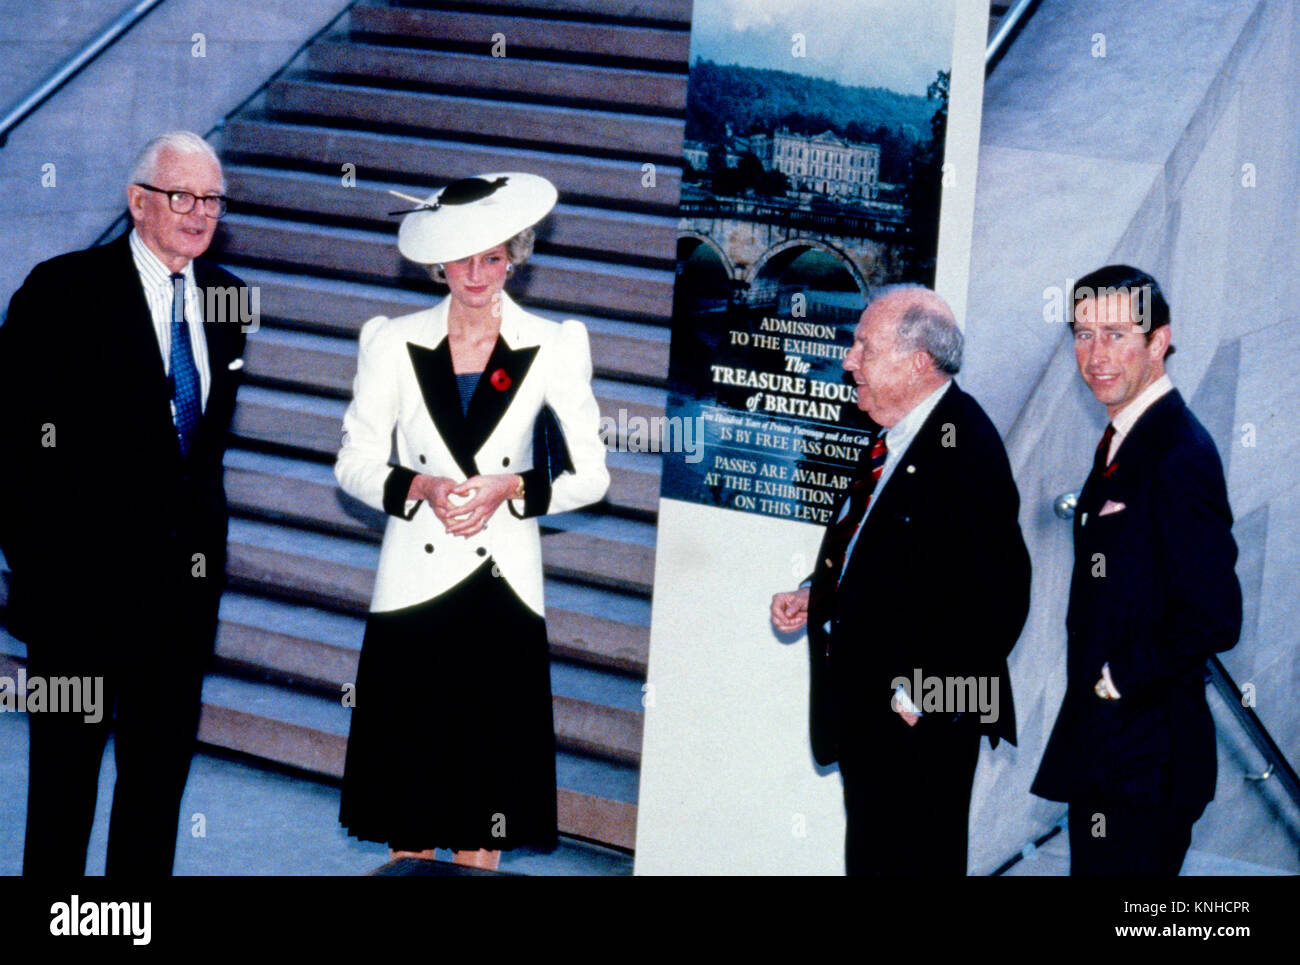 After signing the guest book of the National Gallery of Art, the Royal couple and their escorts were asked to pose for a group photo prior to touring the exhibit 'The Treasure Houses of Britain: 500 Years of Private Patronage and Art Collecting' at the National Gallery of Art in Washington, DC on November 11, 1985. From left to right: John Stevenson, President of the National Gallery of Art; Princess Diana; Dr. Franklin Murphy, Board Chairman of the National Gallery of Art; and Prince Charles. Credit: Peter Heimsath / Pool via CNP/MediaPunch/MediaPunch Stock Photo